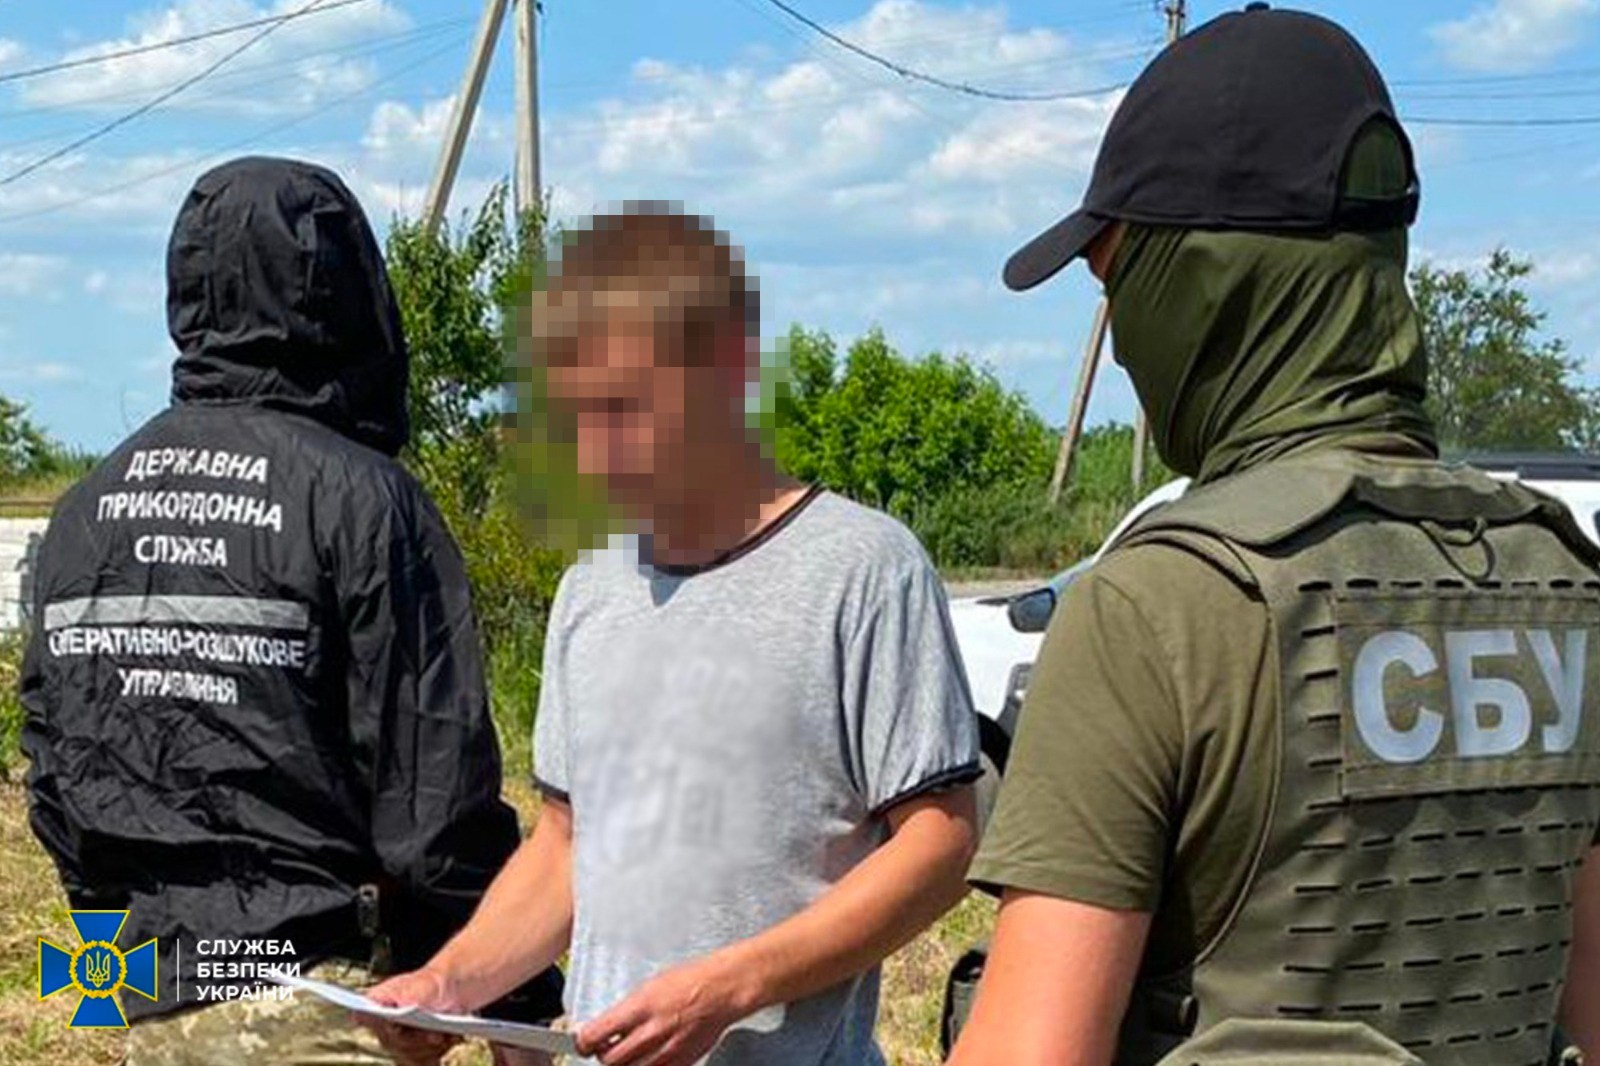 SBU exposes another Russian collaborator in Donetsk (Image courtesy: Facebook)